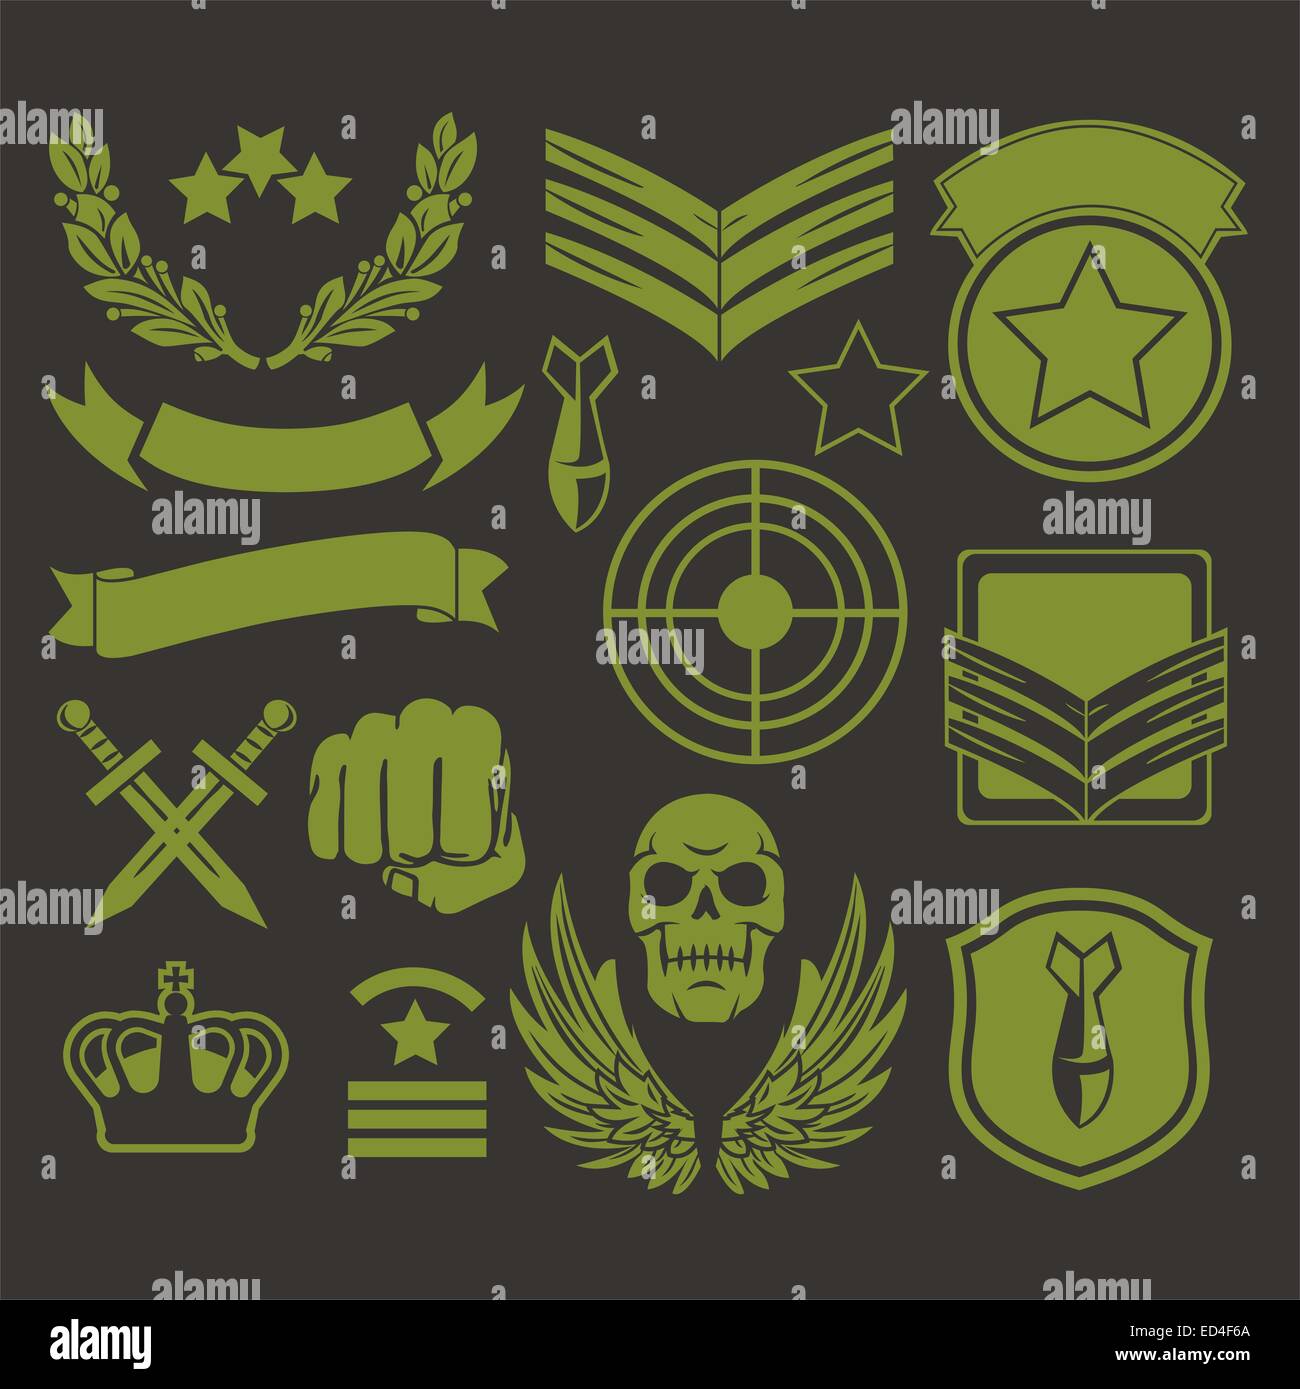 Special forces patch set - stock Stock Photo